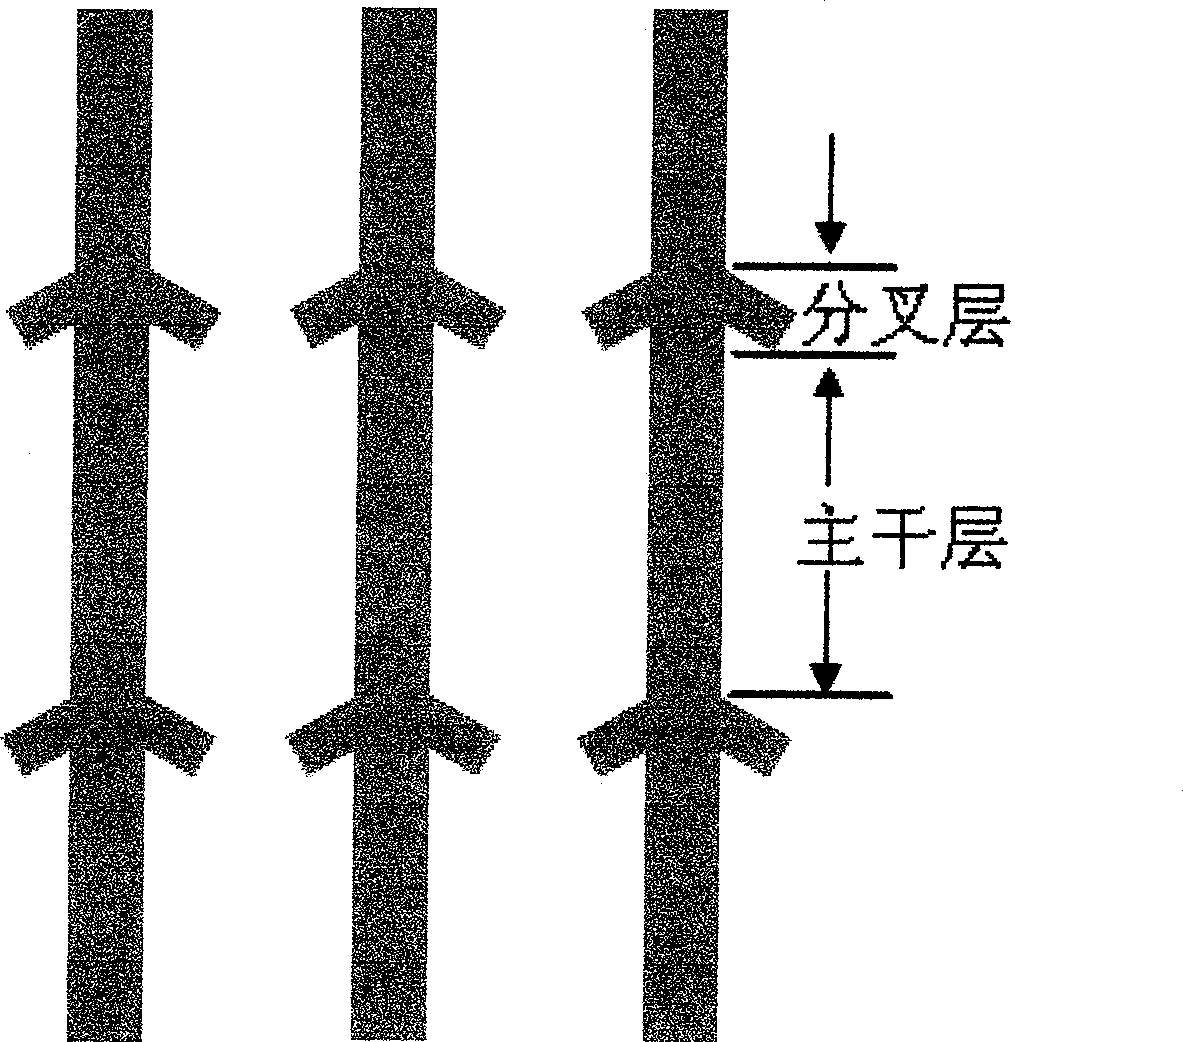 Porous aluminum oxide film light filter with bifurcate holes and preparation method thereof